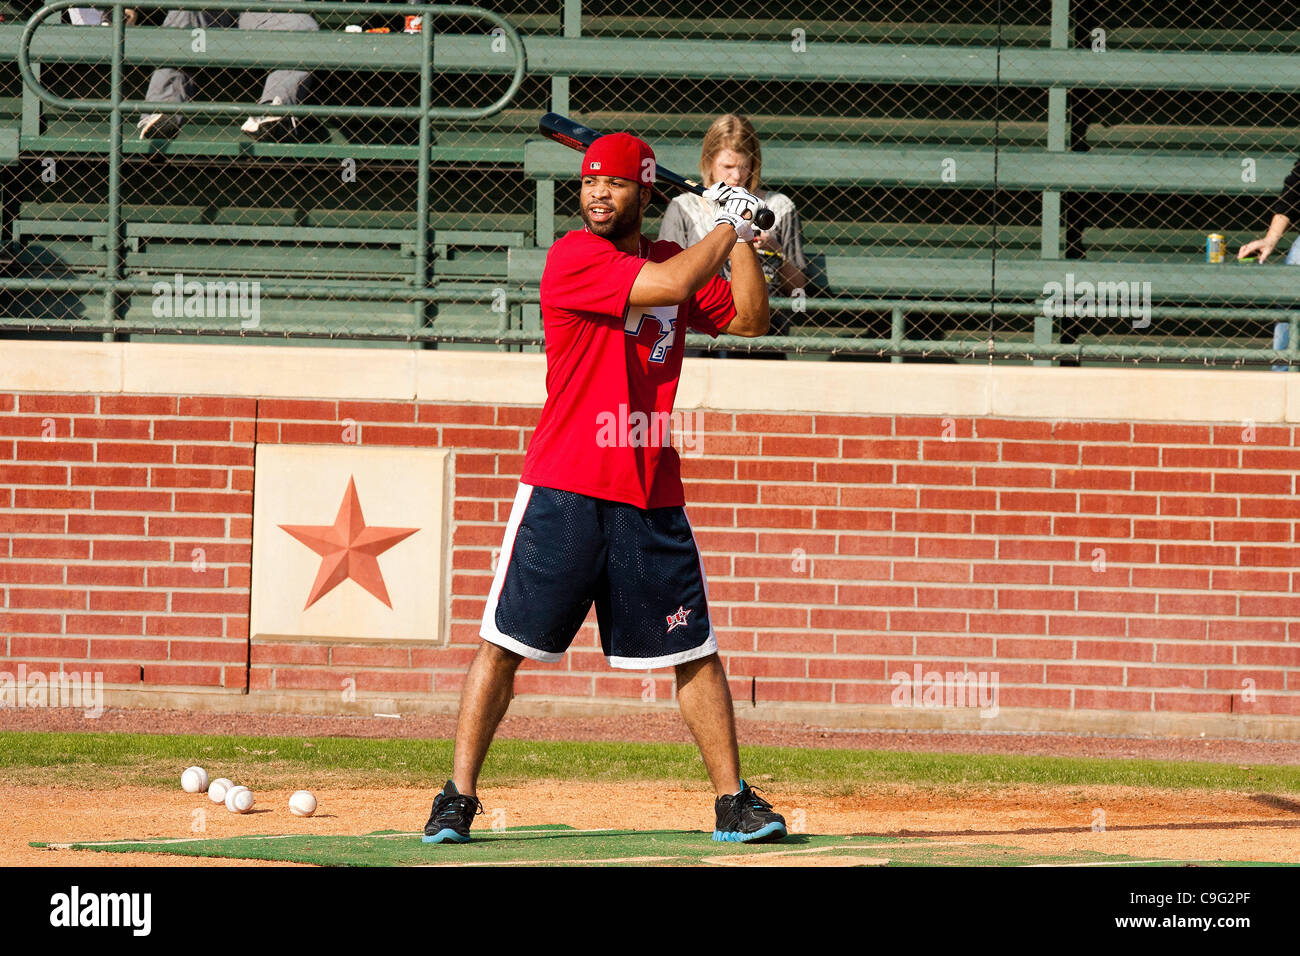 Dec. 18, 2011 - Houston, Texas, U.S - MLB Player Phillip Allen participated in the home-run derby during the 3rd Annual Hunter Pence Baseball Camp at Baseball USA in Houston, TX. (Credit Image: © Juan DeLeon/Southcreek/ZUMAPRESS.com) Stock Photo